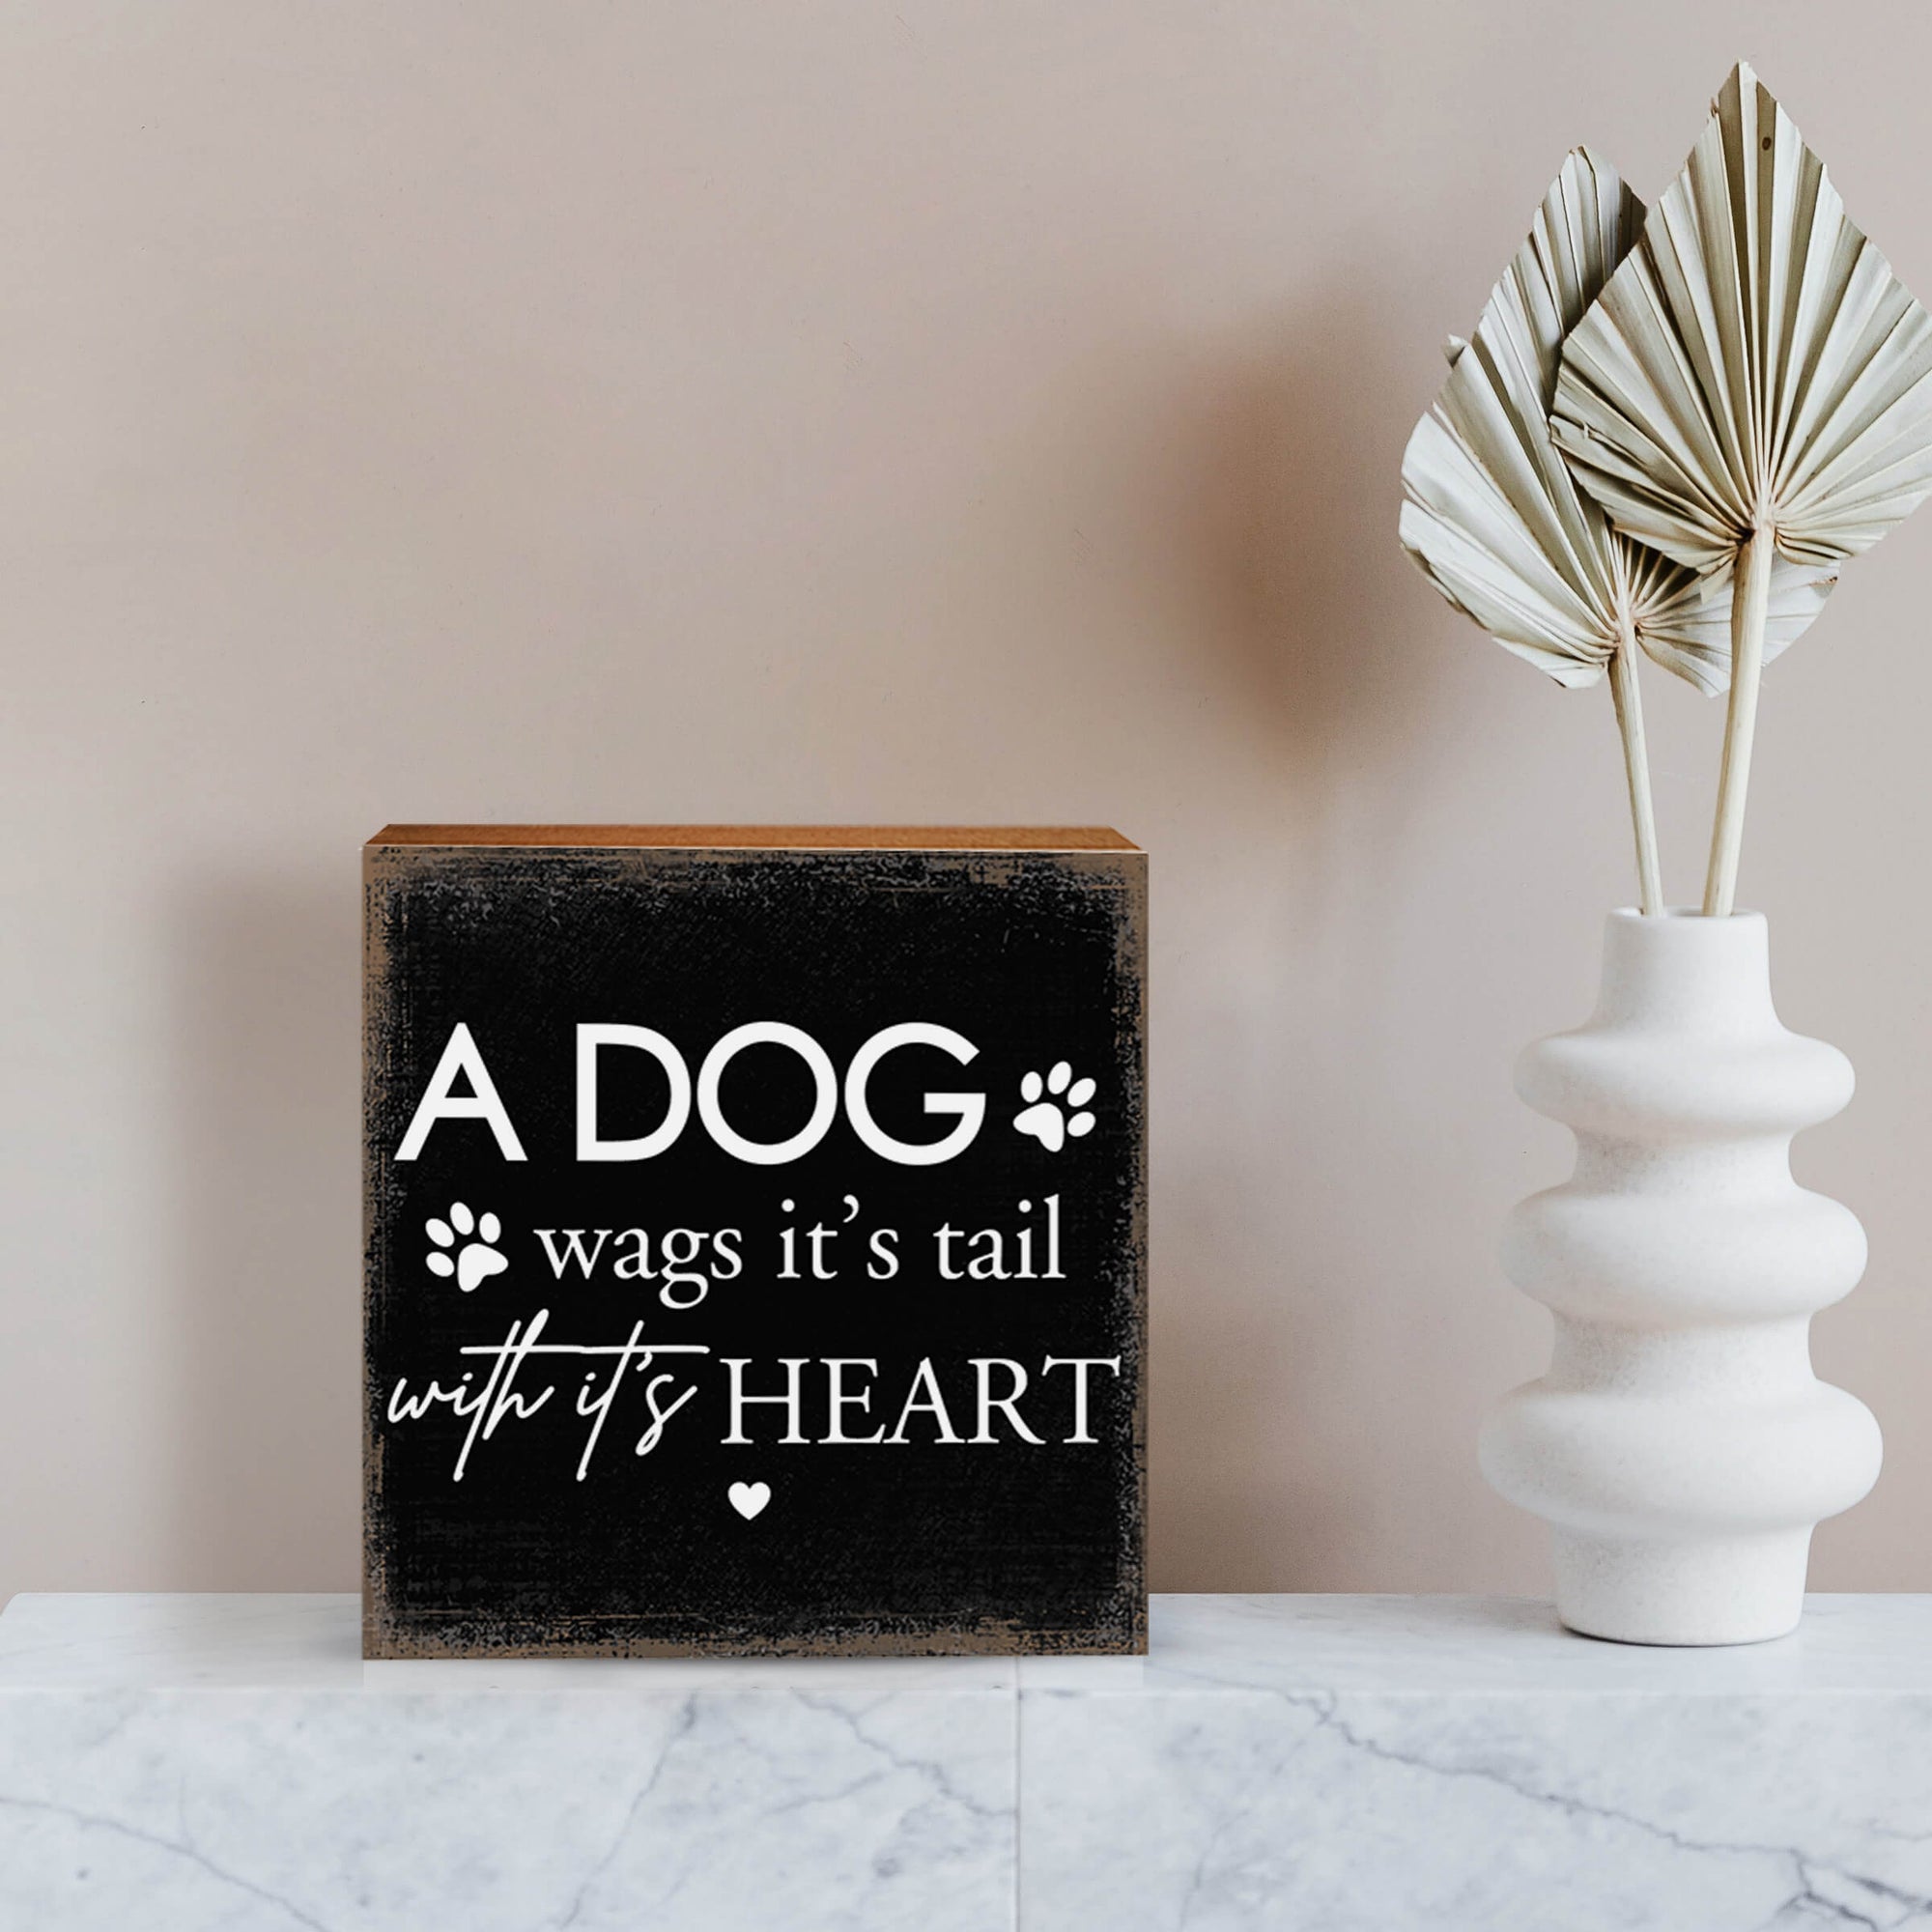 Wooden Shelf Decor and Tabletop Signs with Pet Verses - A Dog Wags Its Tail